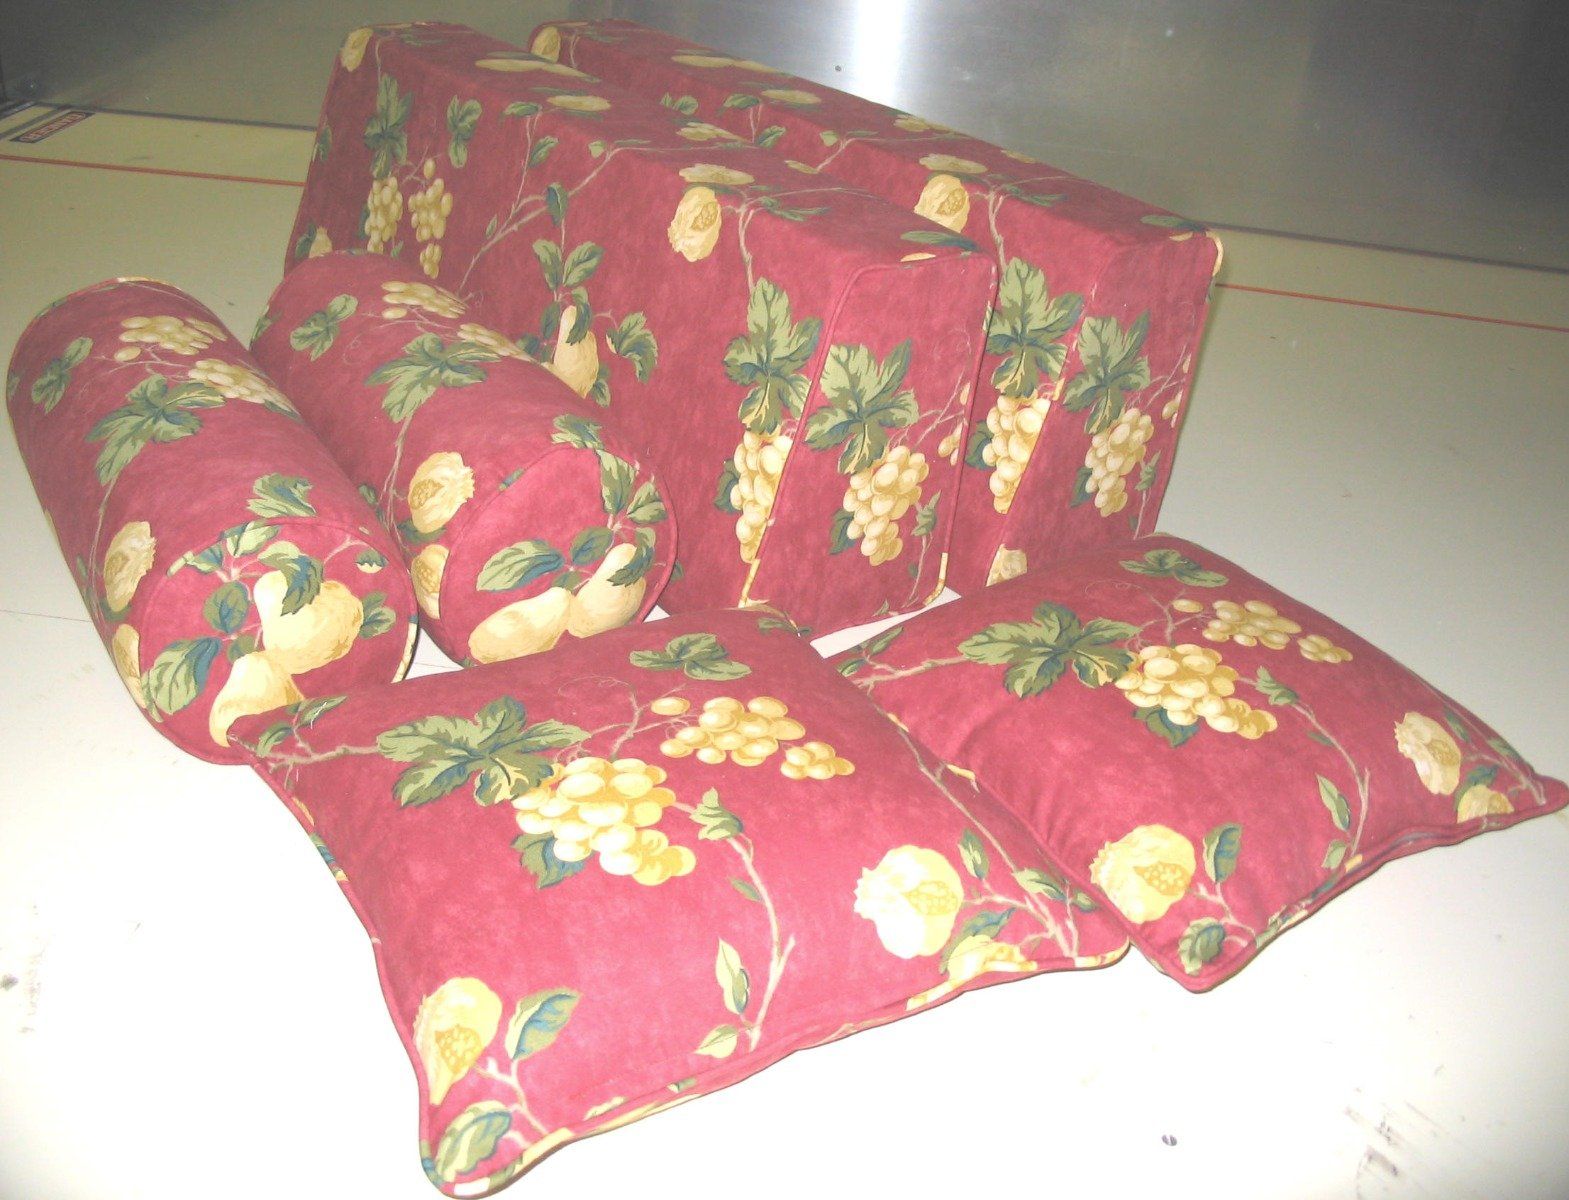 back bolster with covers